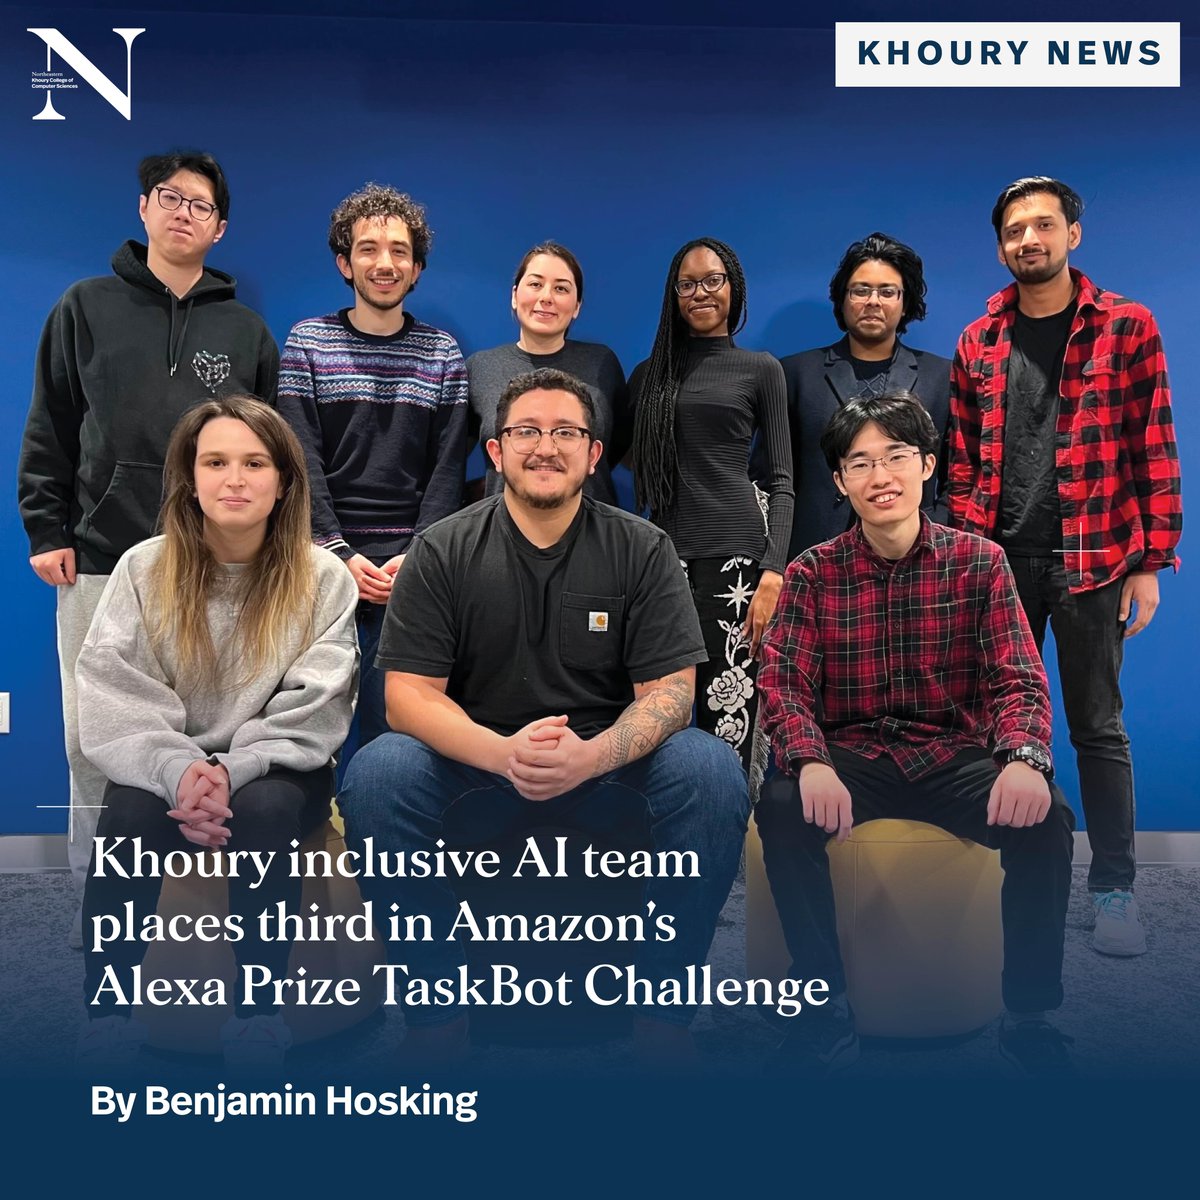 When Malihe Alikhani joined Khoury College last year, she brought a talented team of AI researchers with her. Now, powered by its mission to design equitable language tech, that team has made its mark at an Amazon competition. @malihealikhani @asicil96 @katwellll @Merterm